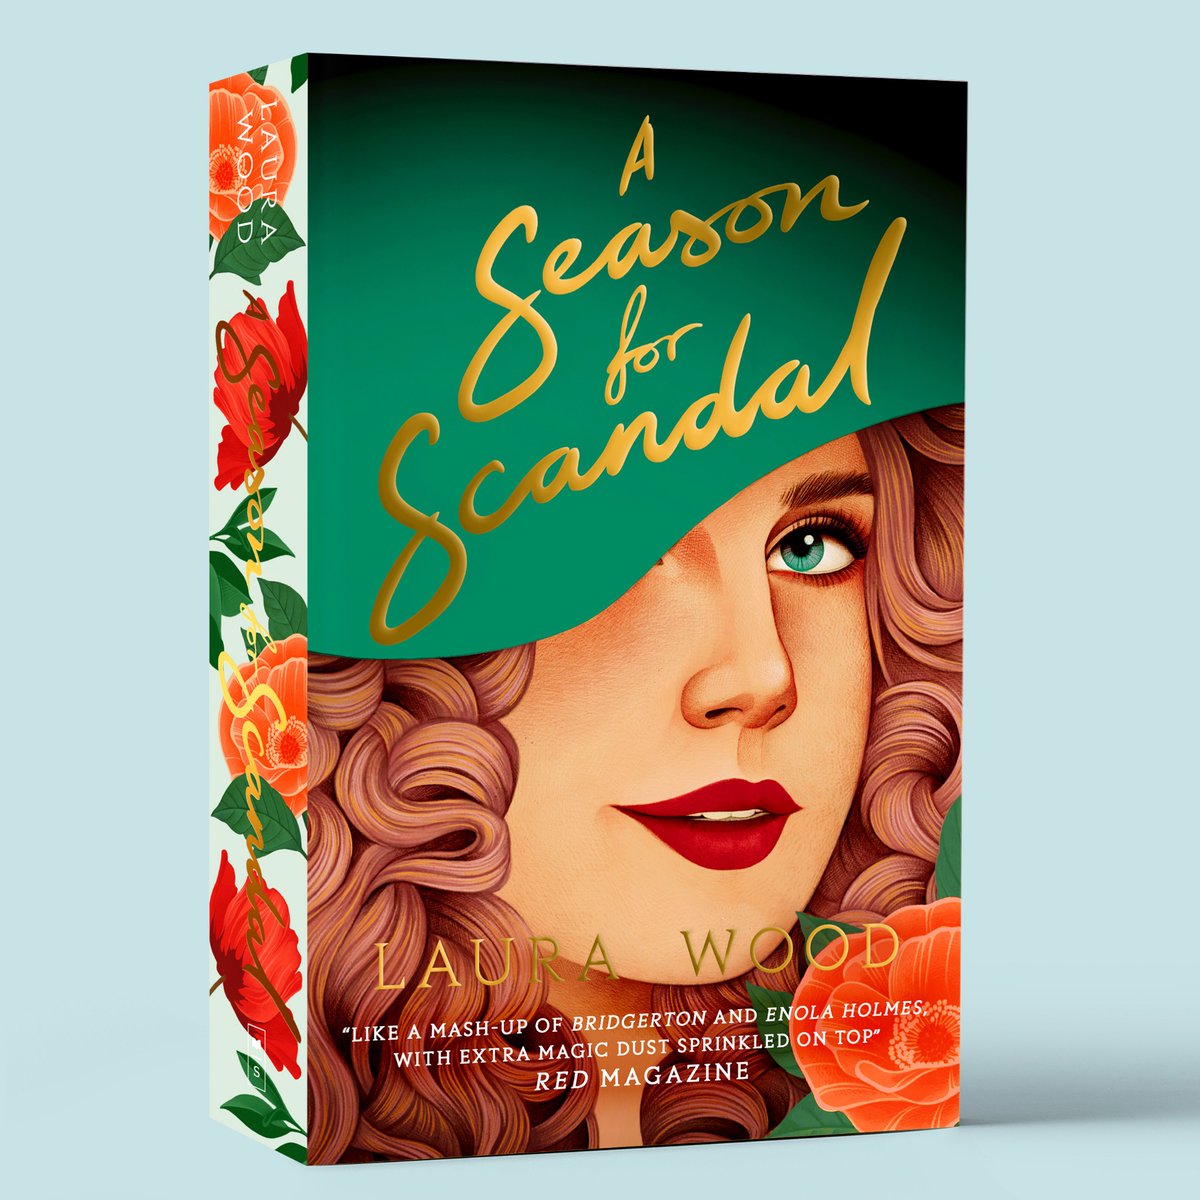 *High pitched screams* LOOK AT THIS!!!! The cover for #ASeasonForScandal is here and it is beautiful beyond all imagining thanks to @jgregorydesign and Mercedes deBellard. The ladies of the Aviary are back, Feb 1st! Pre-order now, you’re going to LOVE this one. 🌻